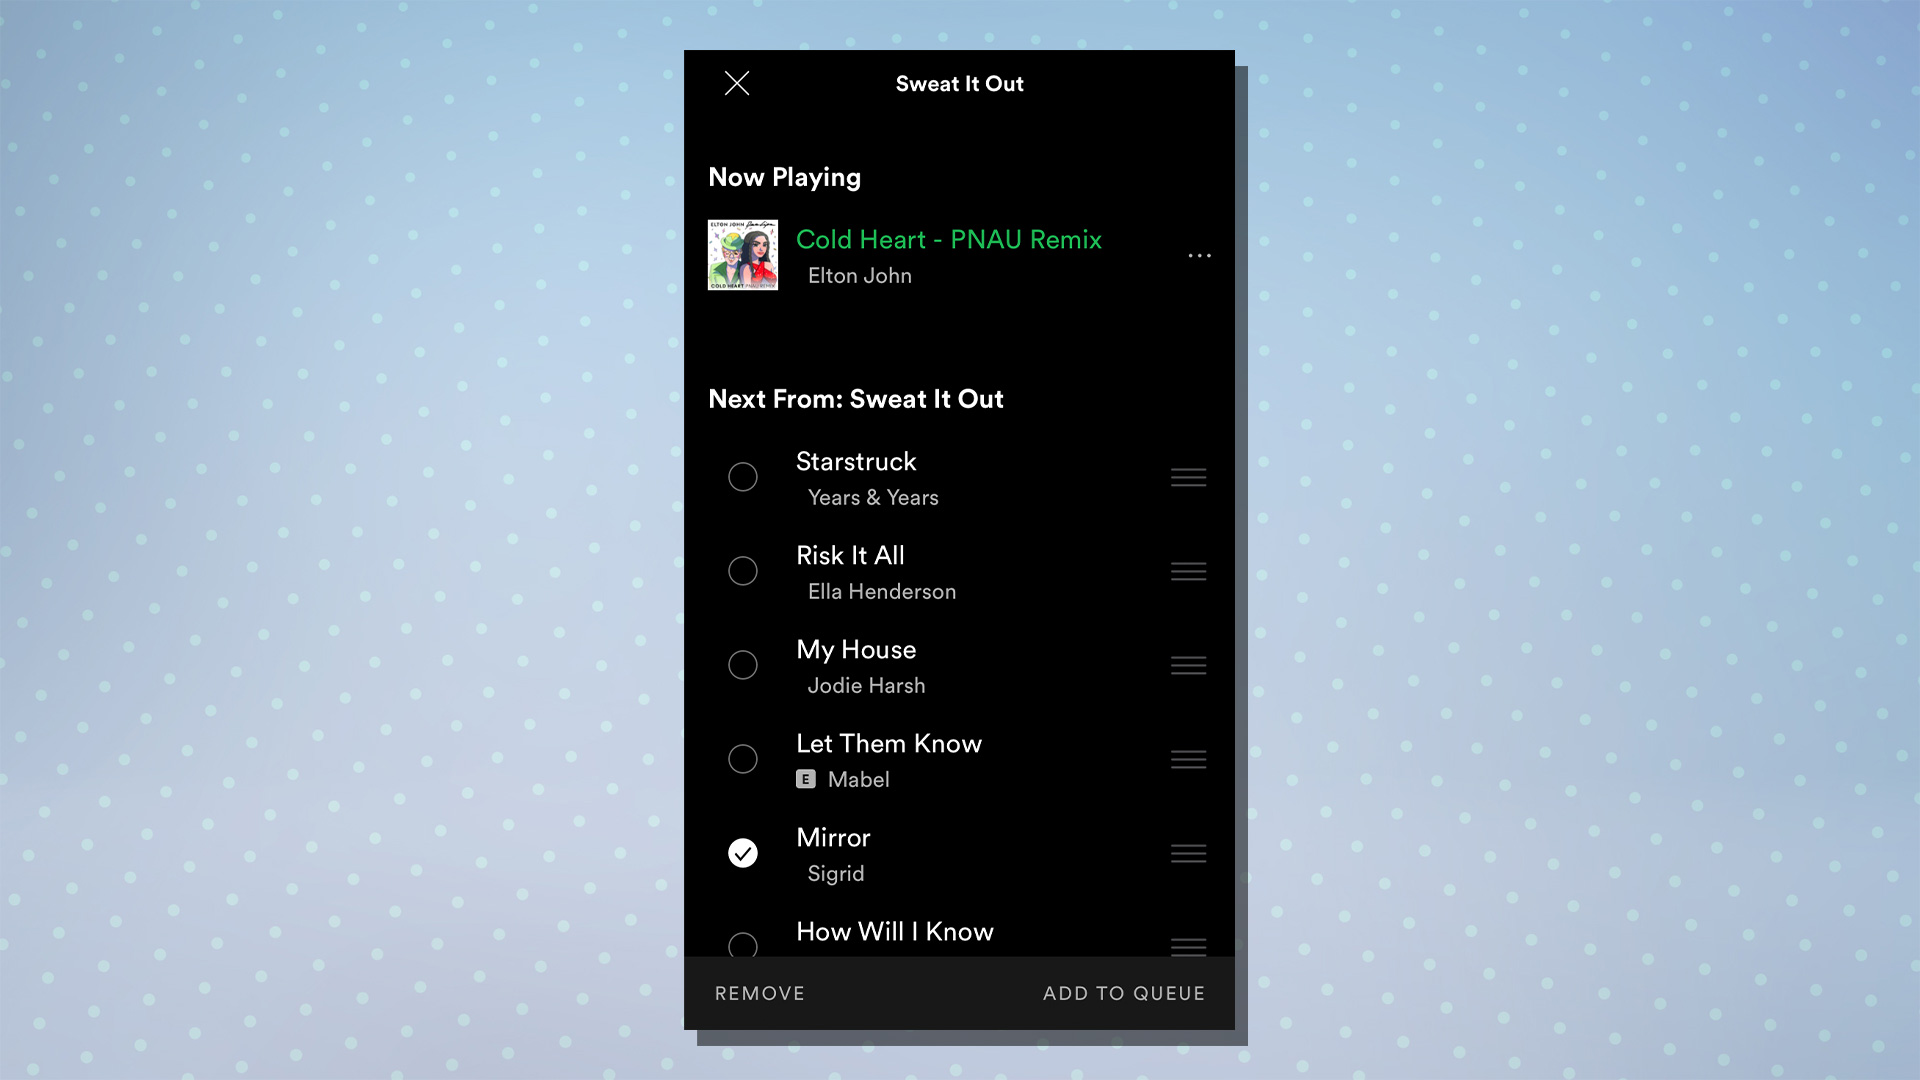 A screenshot from Spotify showing the workout feature